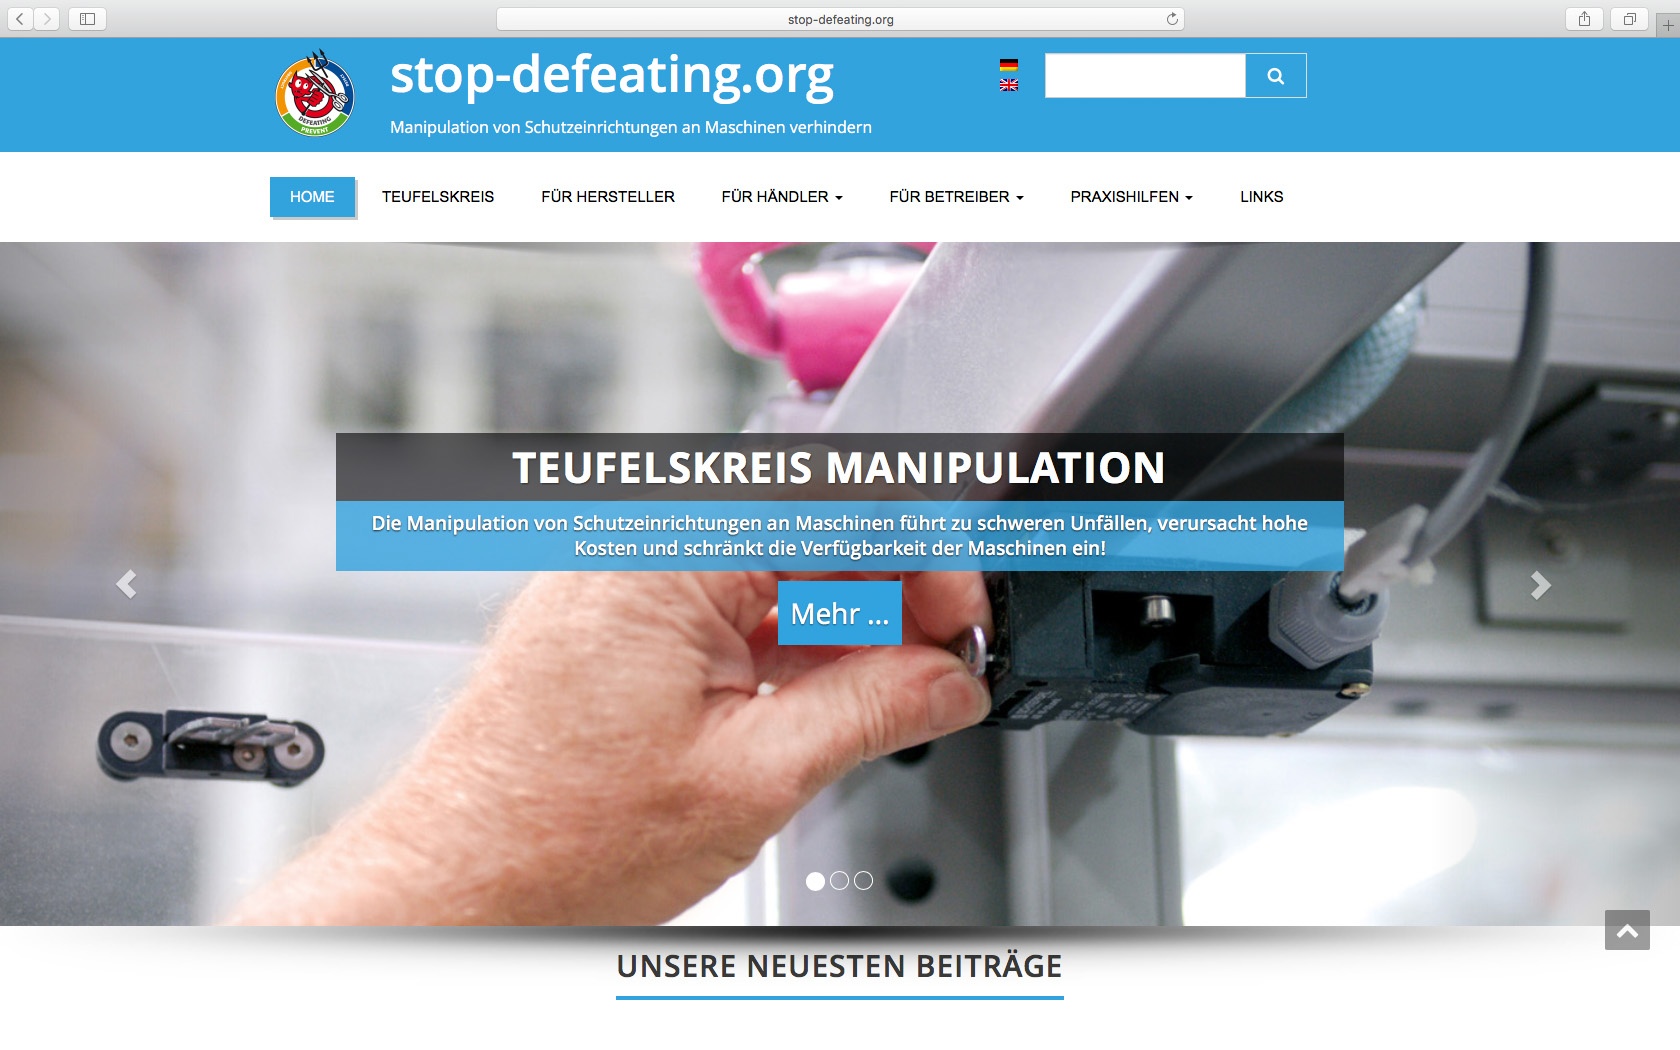 Relaunch Website ’stop-defeating.org‘